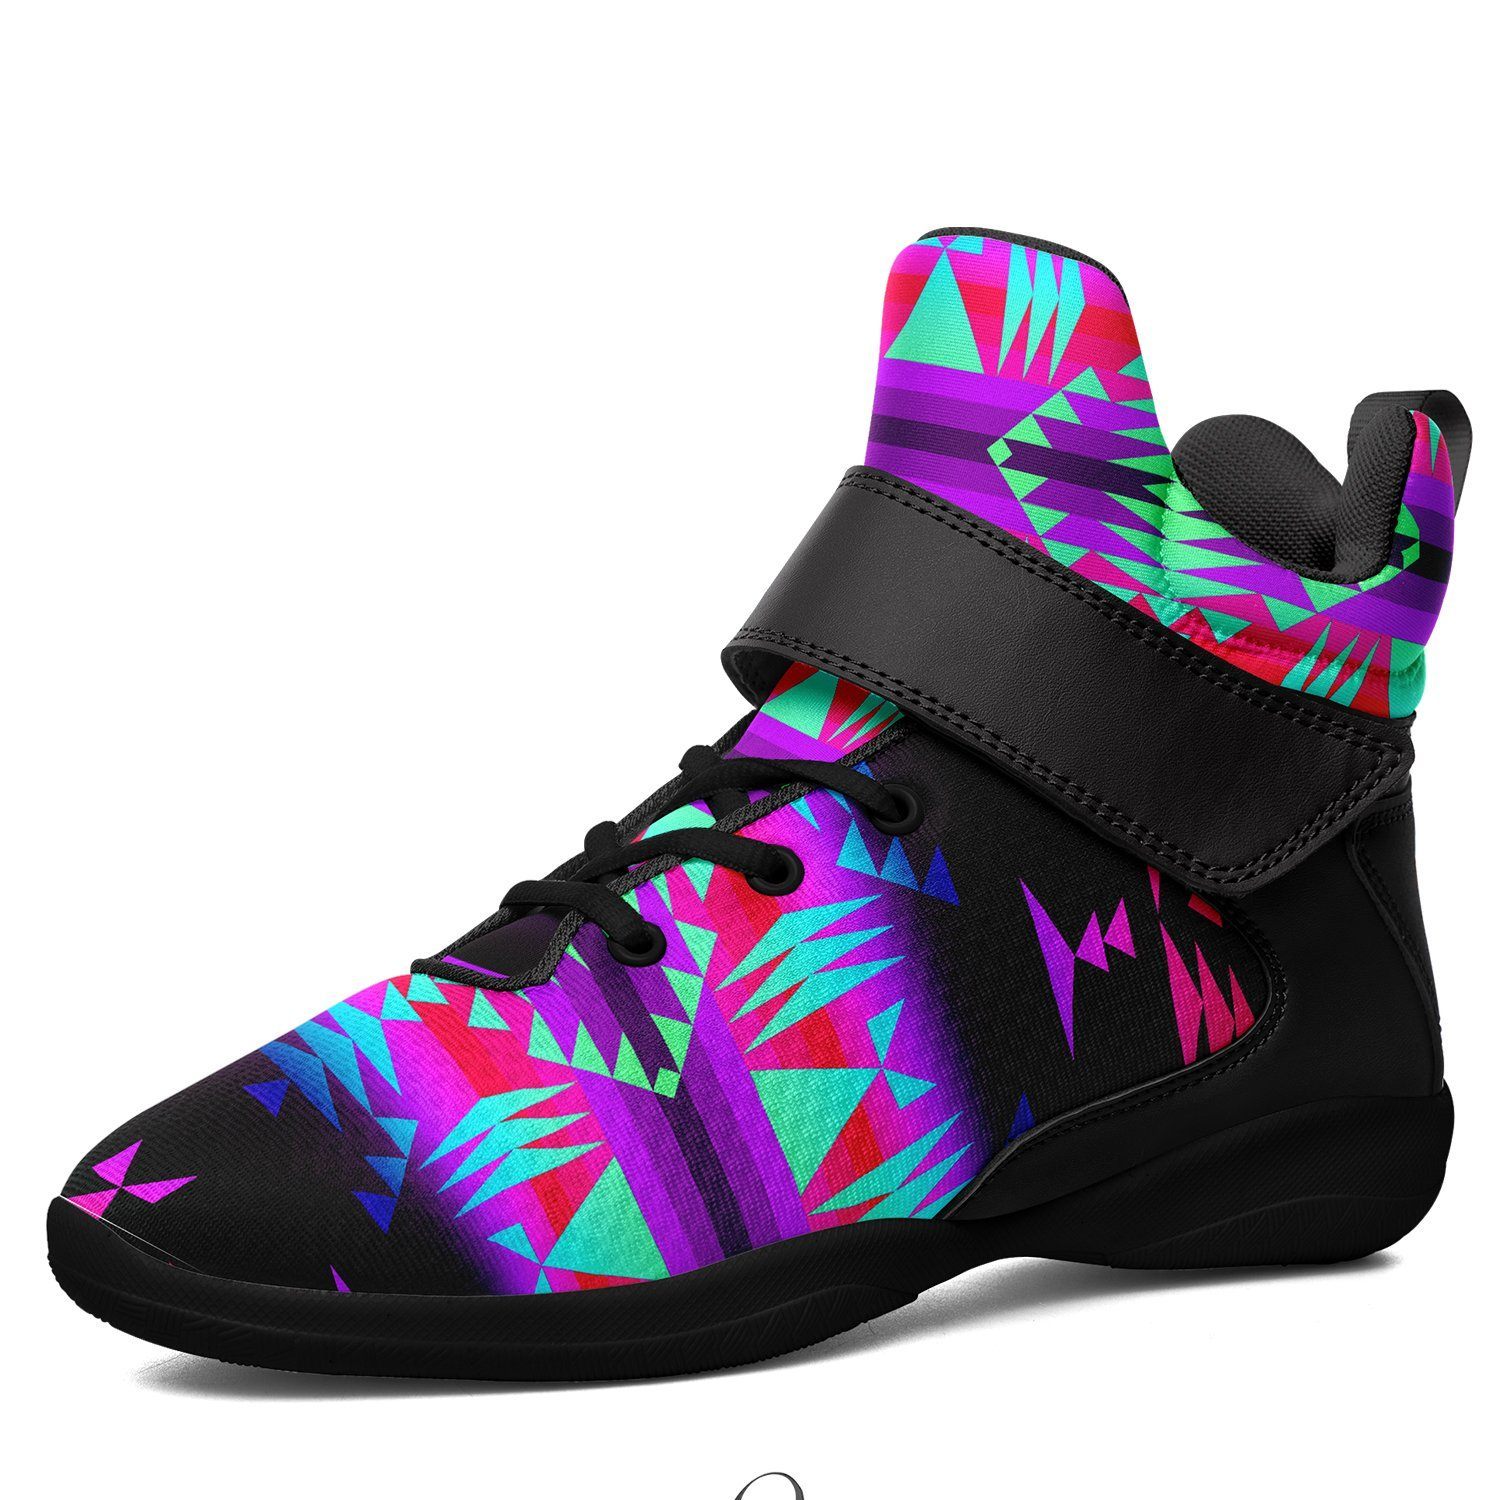 Between the Rocky Mountains Ipottaa Basketball / Sport High Top Shoes - Black Sole 49 Dzine US Men 7 / EUR 40 Black Sole with Black Strap 